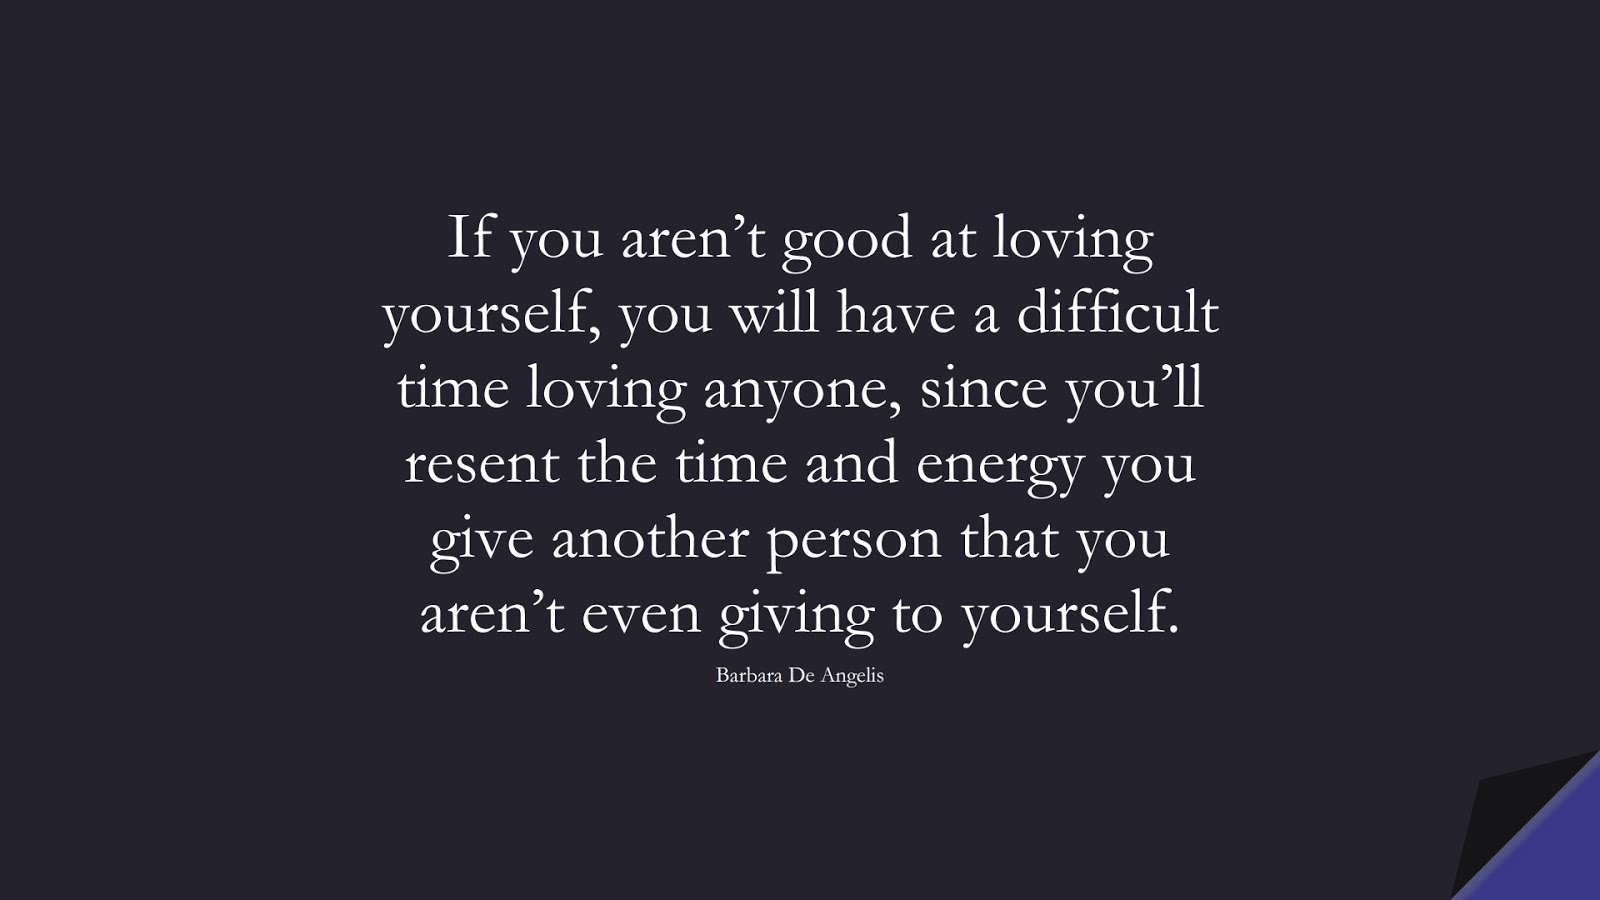 If you aren’t good at loving yourself, you will have a difficult time loving anyone, since you’ll resent the time and energy you give another person that you aren’t even giving to yourself. (Barbara De Angelis);  #LoveQuotes